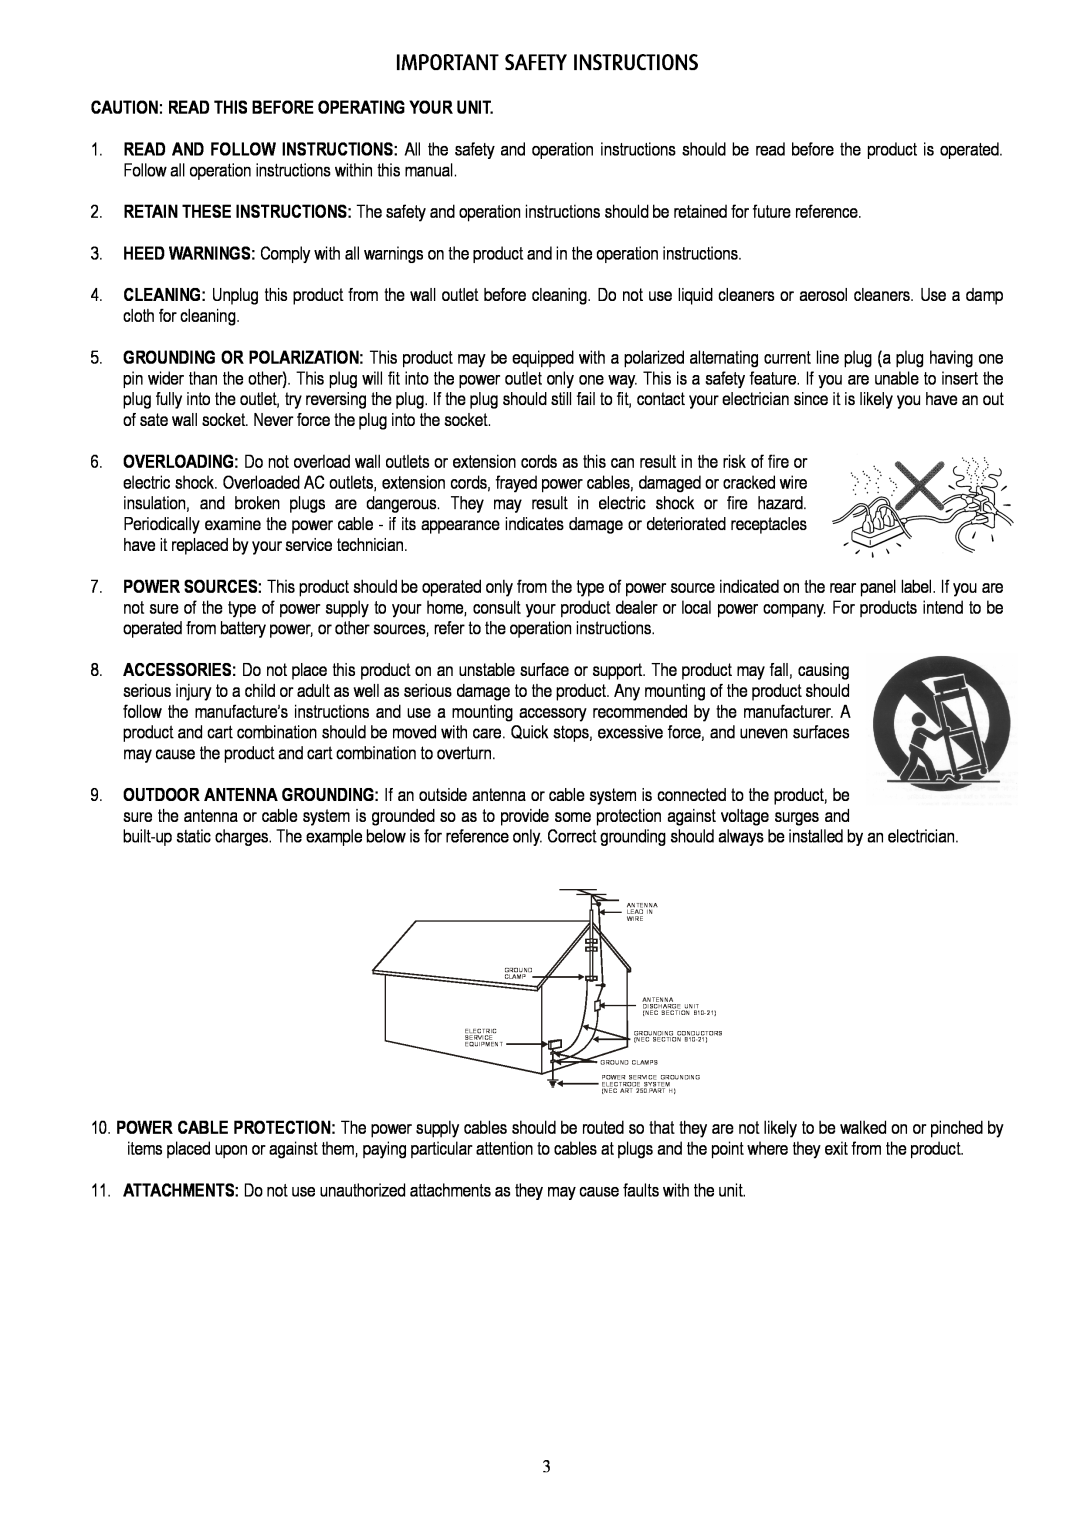 Eltax AVR-320 instruction manual Important Safety Instructions, Caution Read This Before Operating Your Unit 